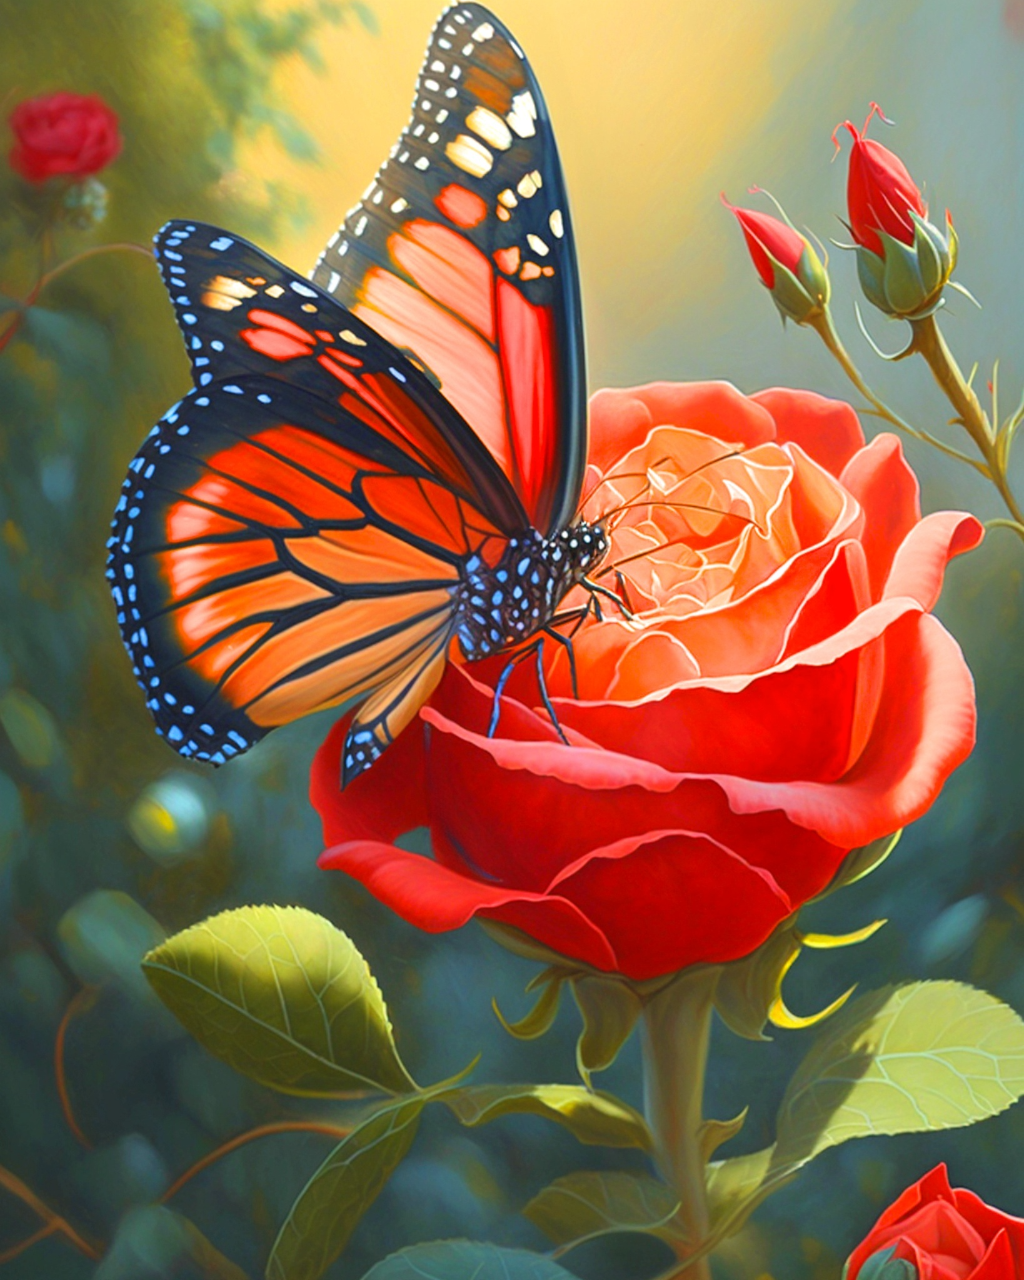 Butterfly And Rose Diamond Painting Kit (Full Drill)